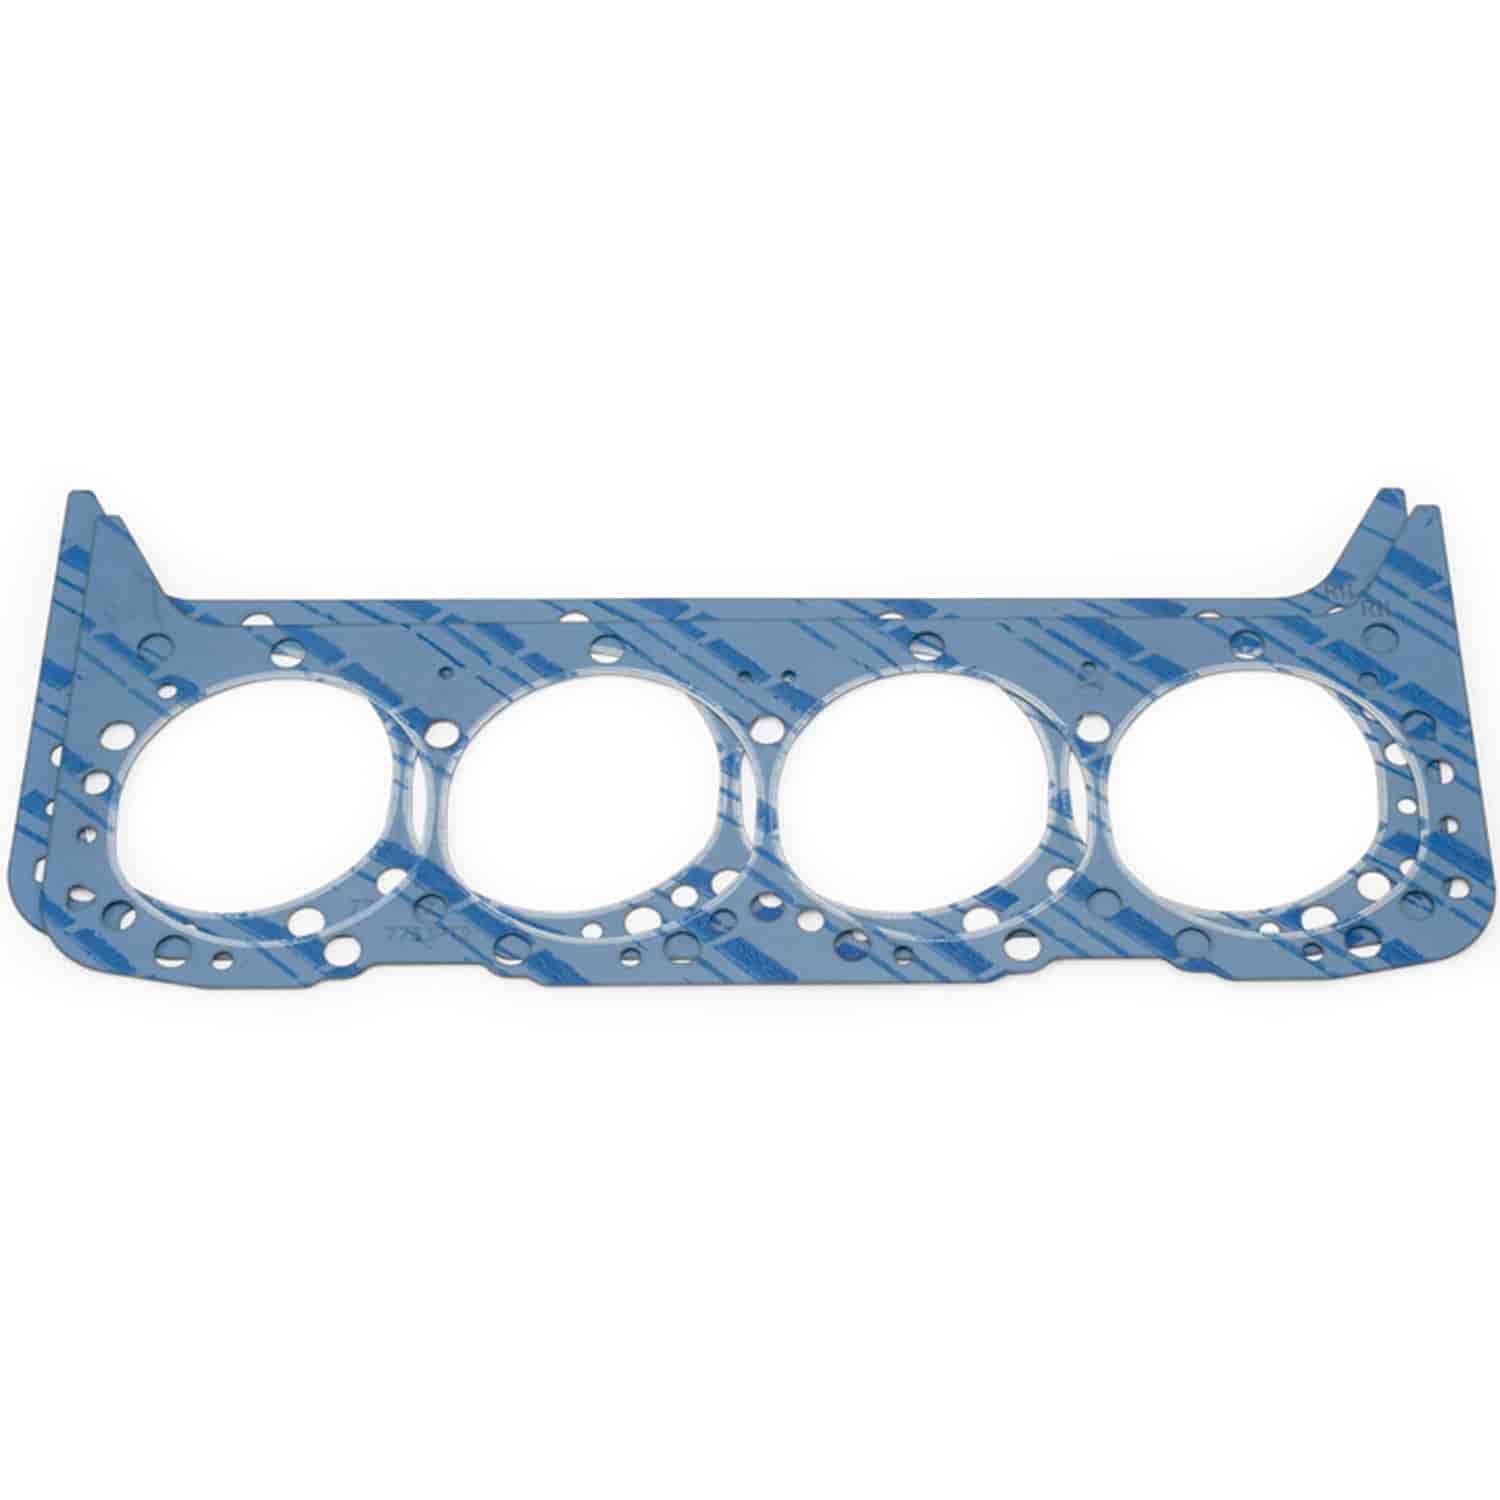 Head Gaskets 1958-86 Chevy 262-350 Small Block